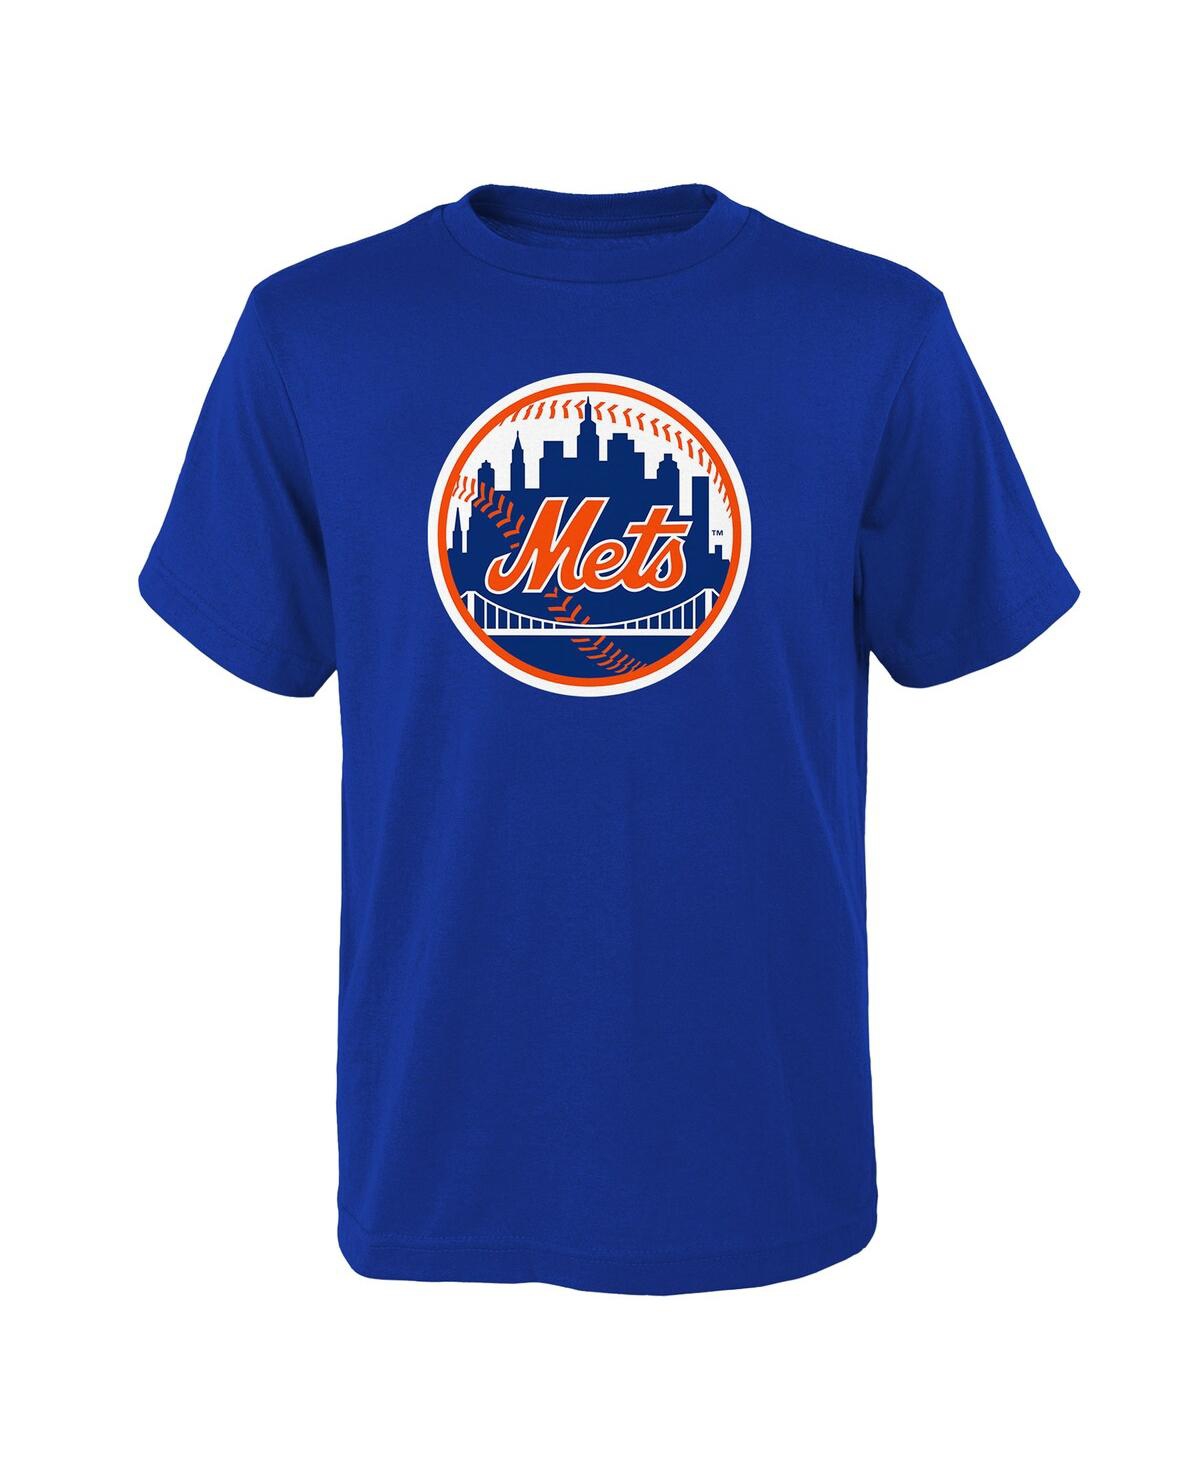 Outerstuff Kids' Big Boys And Girls Royal New York Mets Logo Primary Team T-shirt